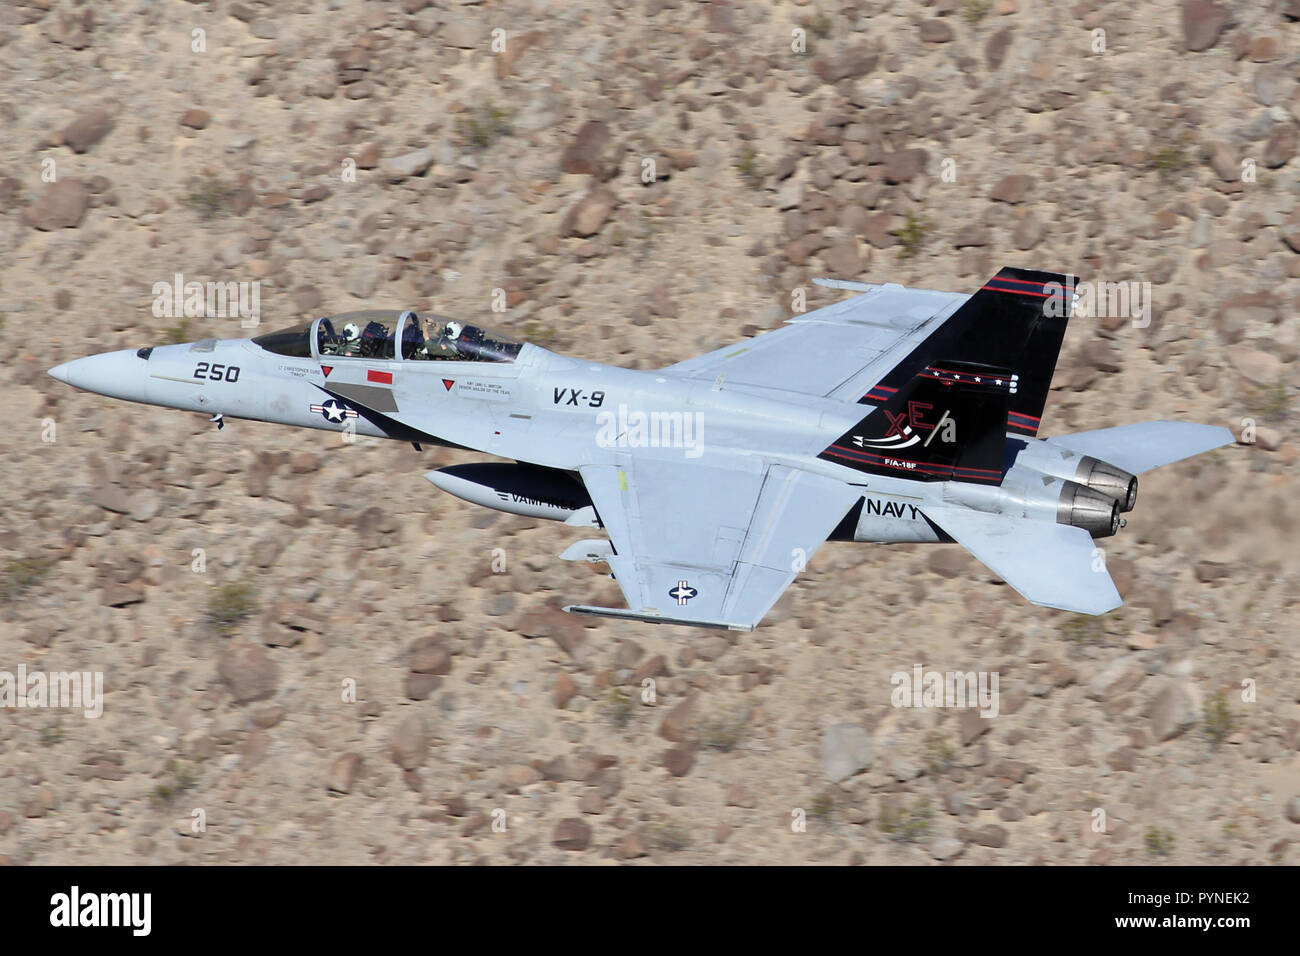 Boeing F/A-18F Super Hornet flown by US Navy test squadron VX-9 'Vampires' from China Lake NWS in Death Valley during 2016 Stock Photo